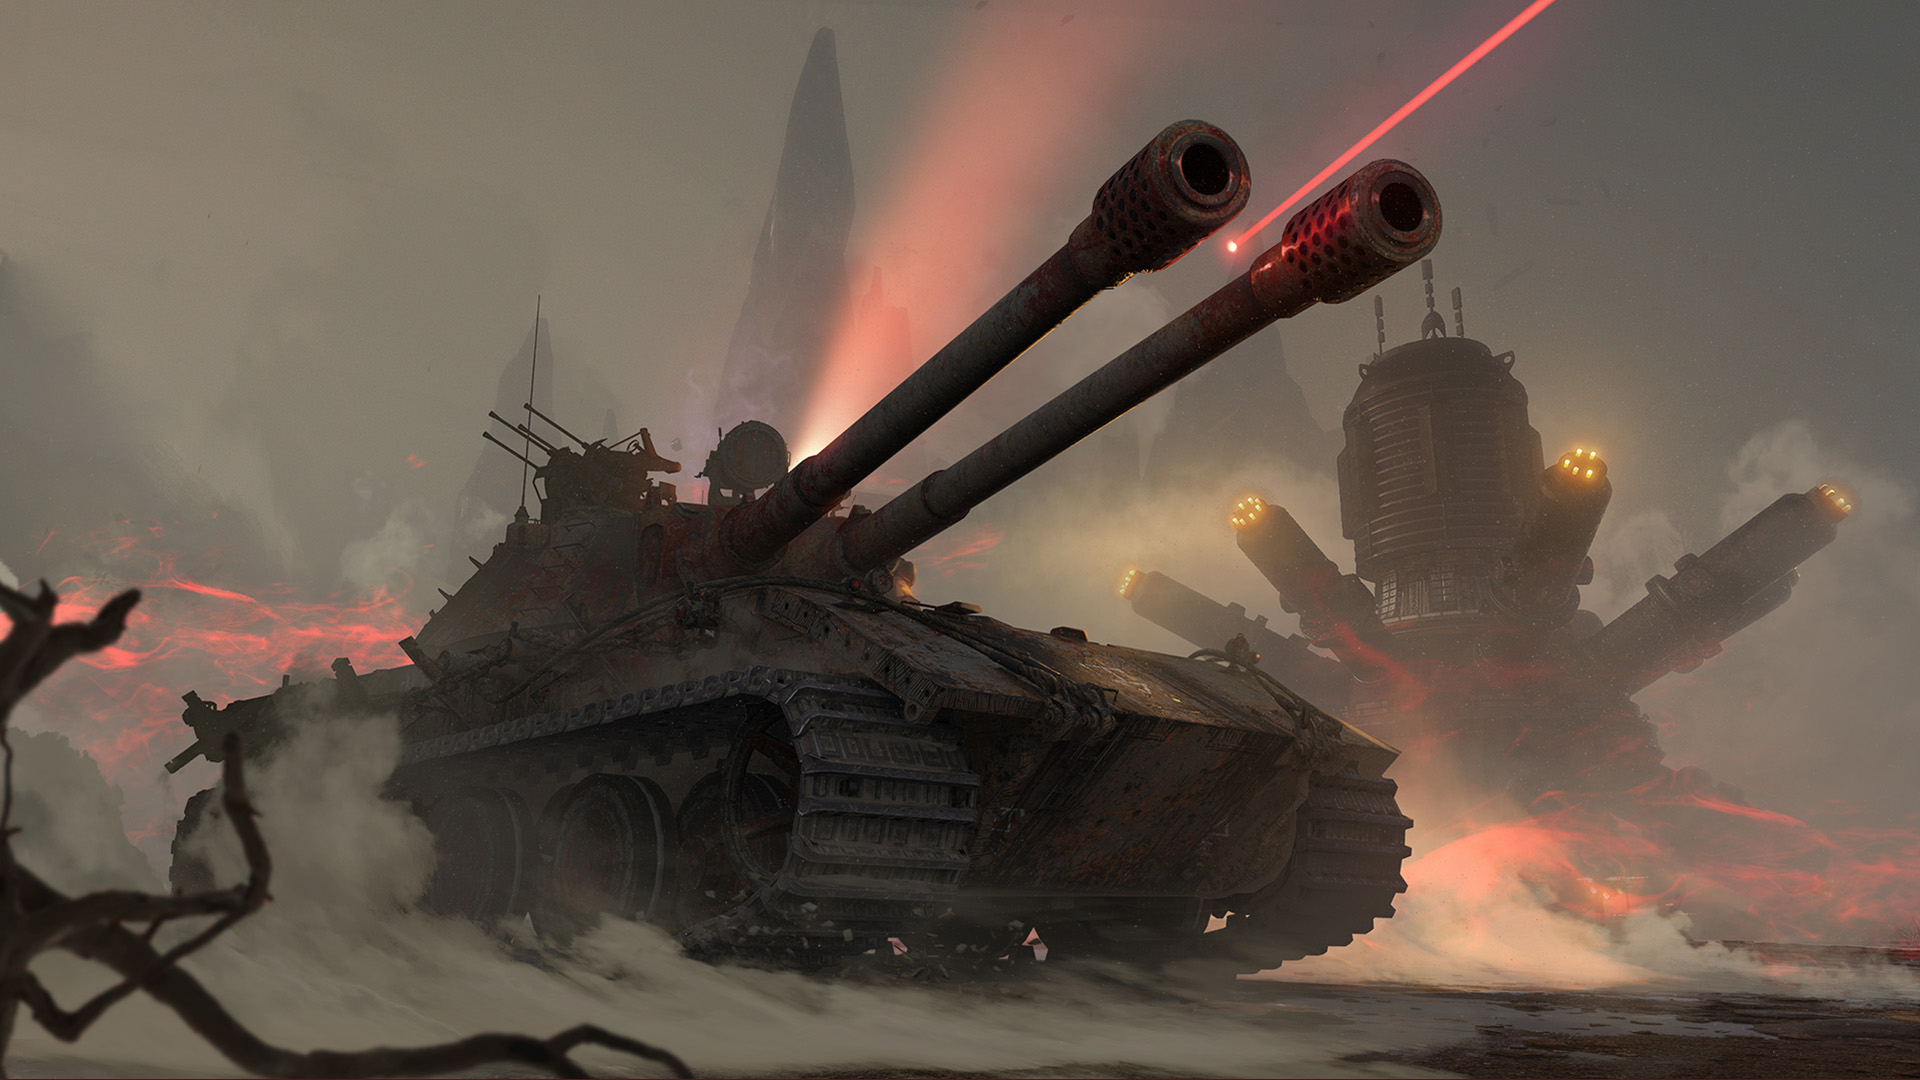 Silent Hill Is Creeping Towards World Of Tanks In Foggy Halloween Event Mirny 13